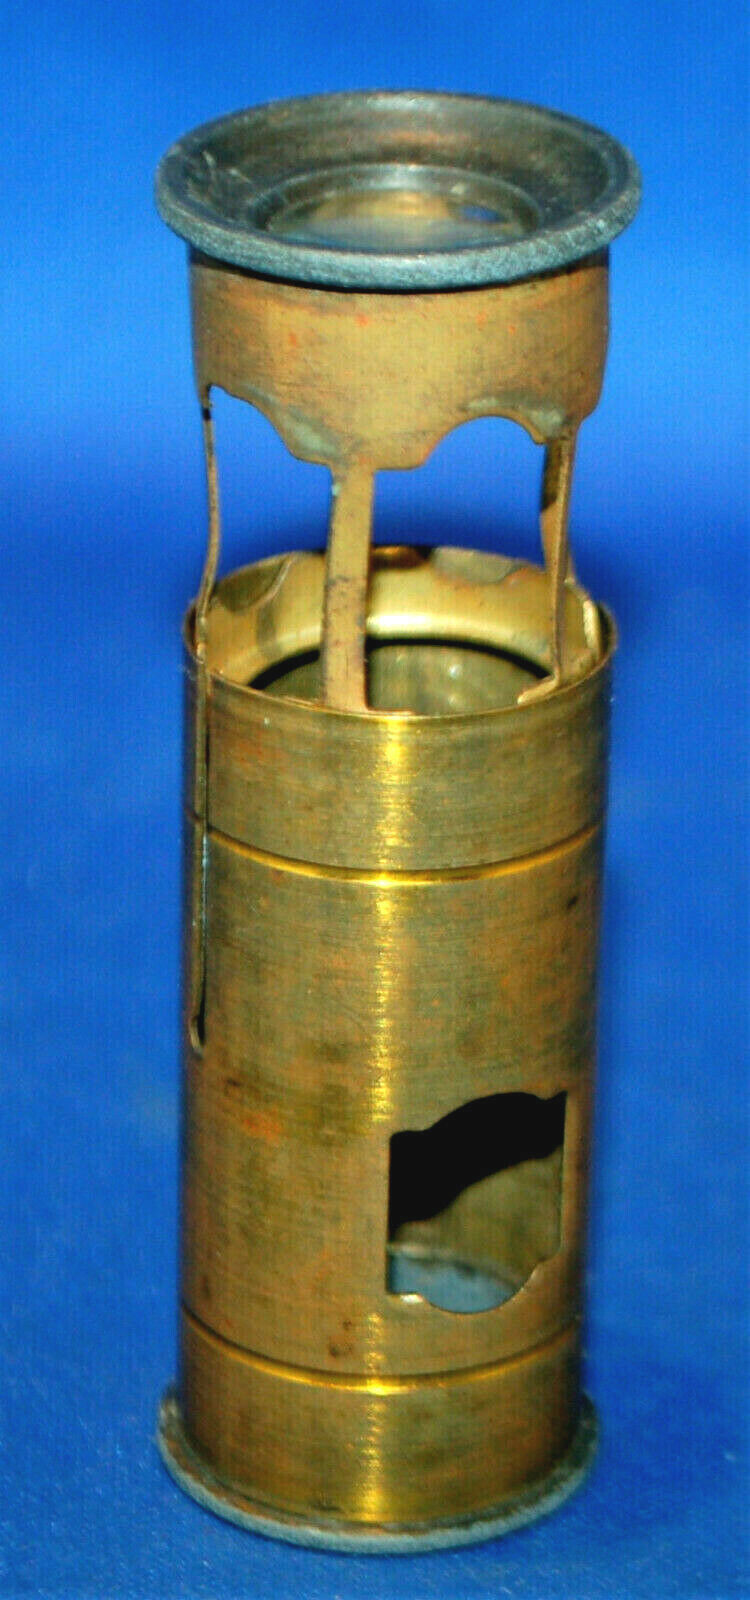 A rare type of antique Victorian brass pocket microscope, florascope